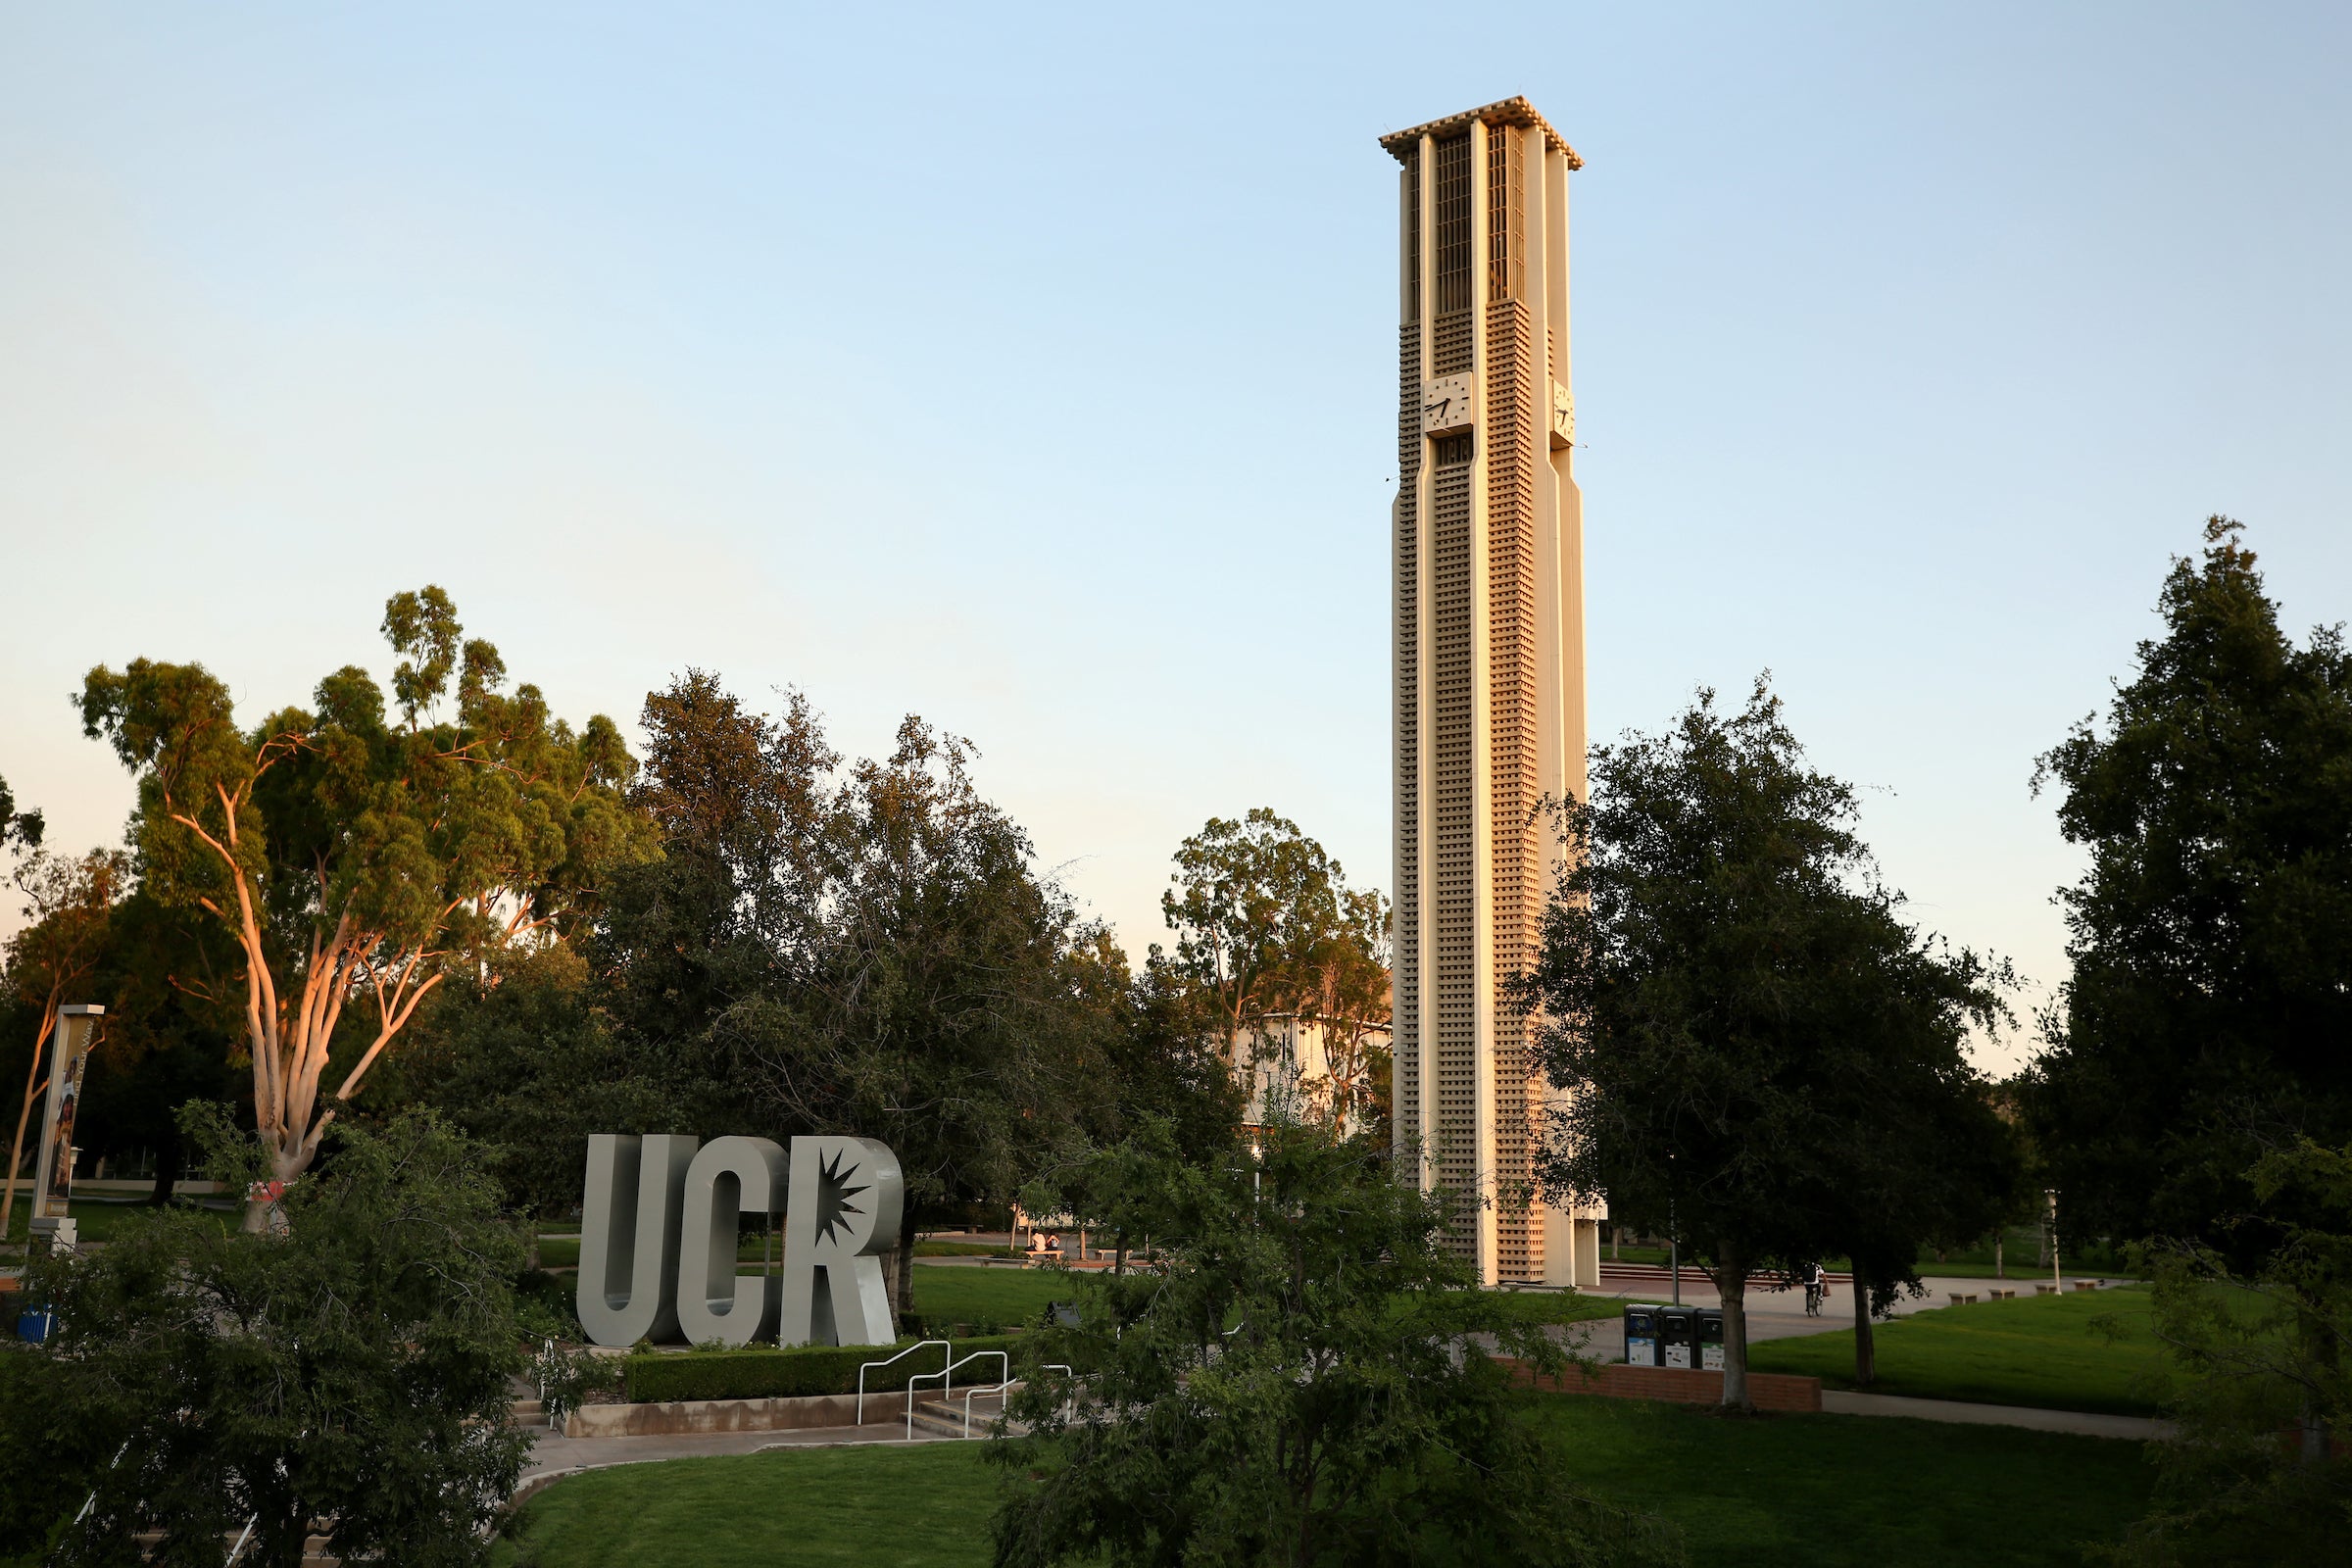 Campus - Bell Tower and UCR Sign